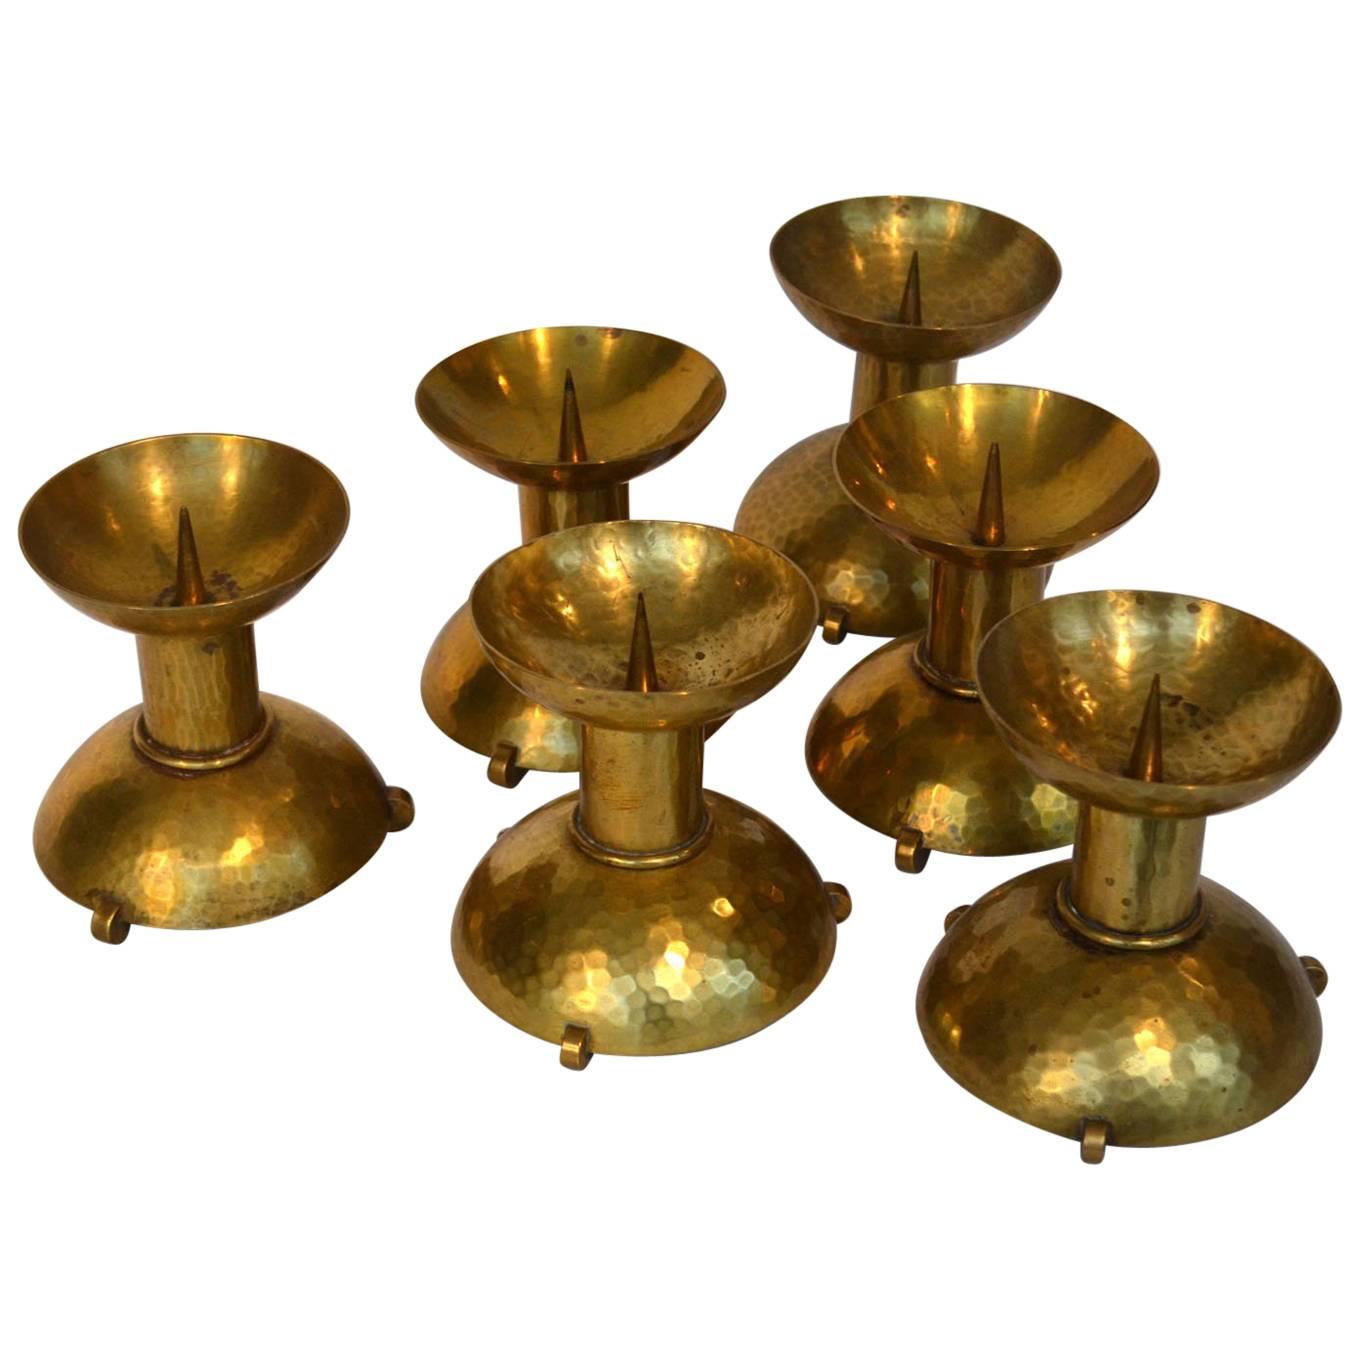  Set of Six Art Deco Brass Candle Holders in Bauhaus Style